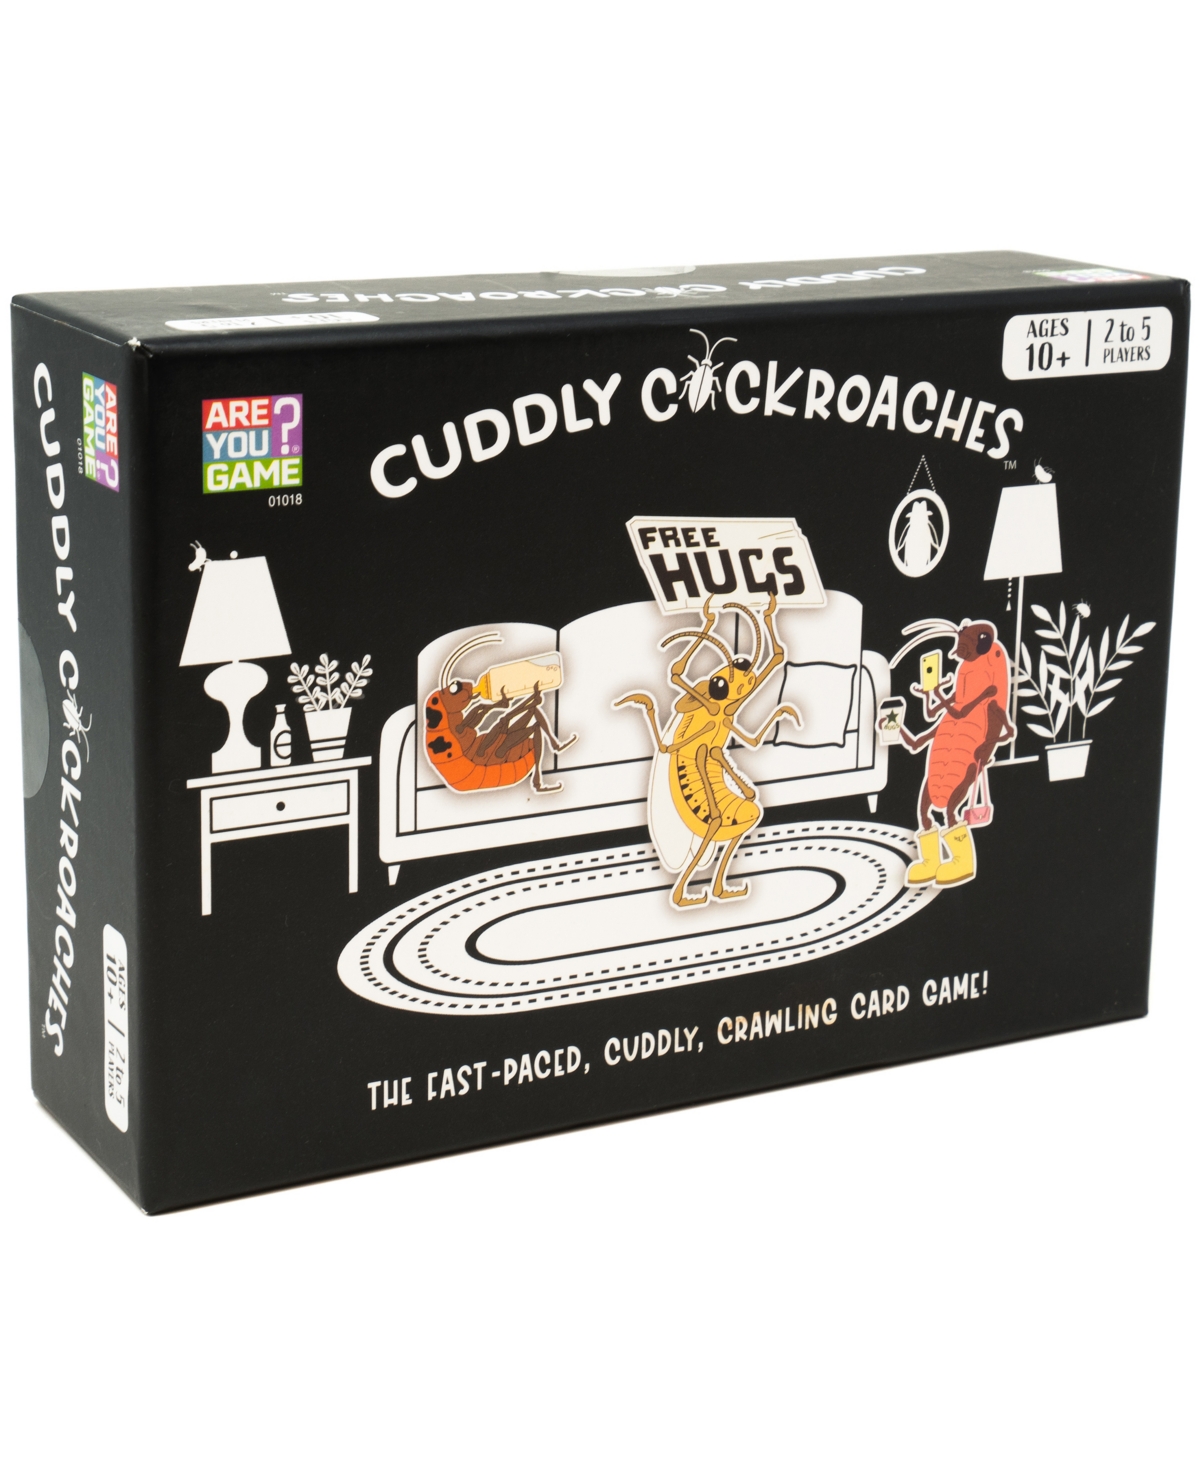 Areyougame Kids' Cuddly Cockroaches Set, 98 Piece In Multi Color